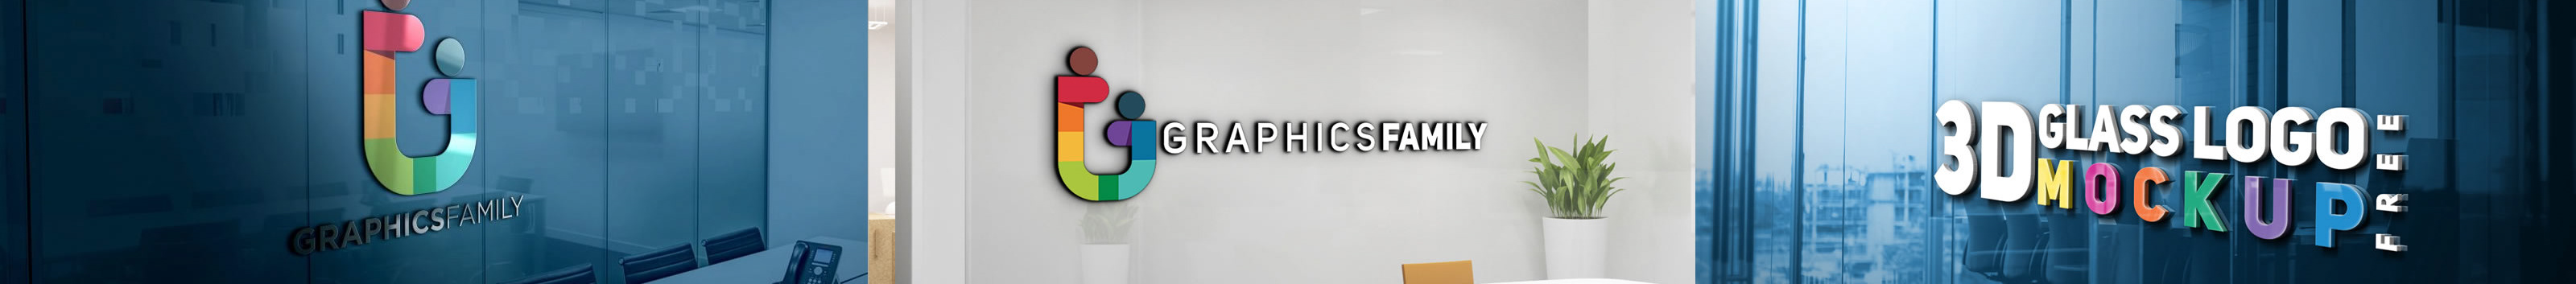 Graphics Family's profile banner